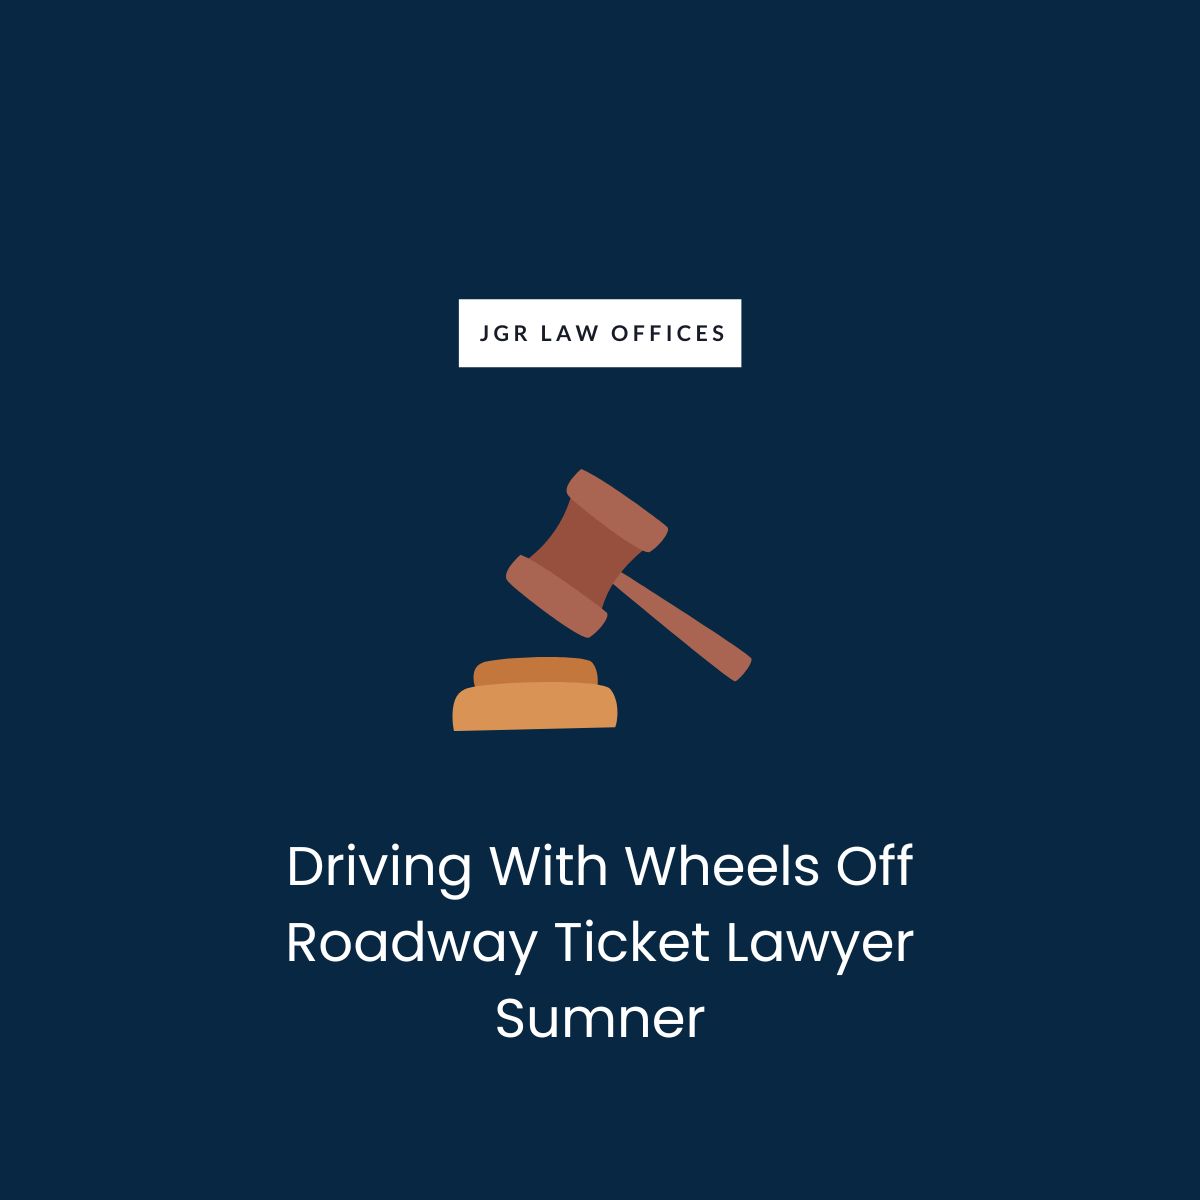 Driving With Wheels Off Roadway Ticket Attorney Sumner